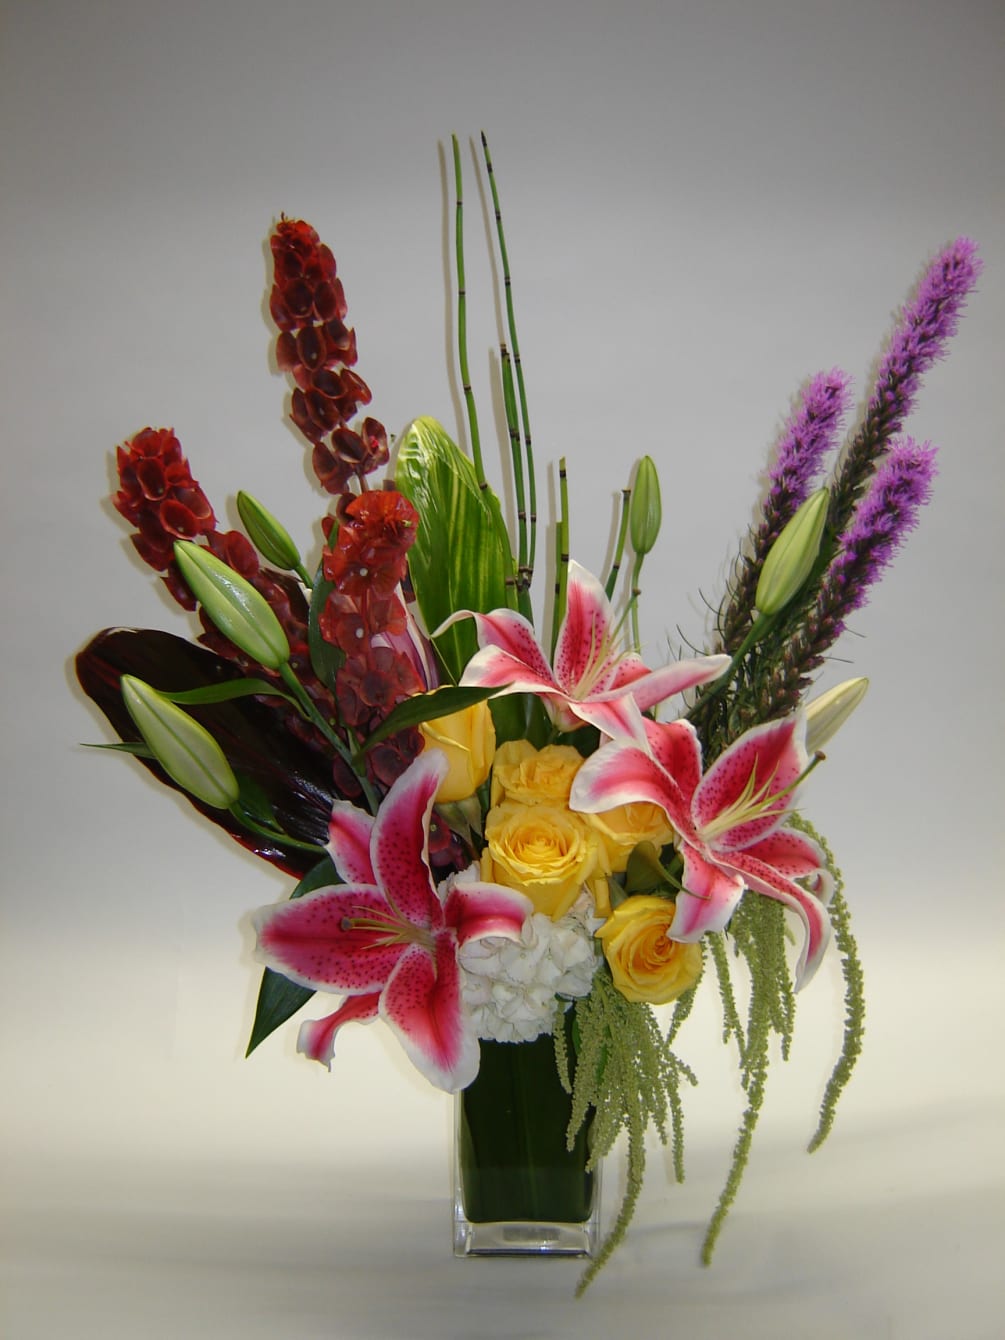 Red Bells of Ireland, liatris, stargazer lilies, yellow roses and hydrangea will